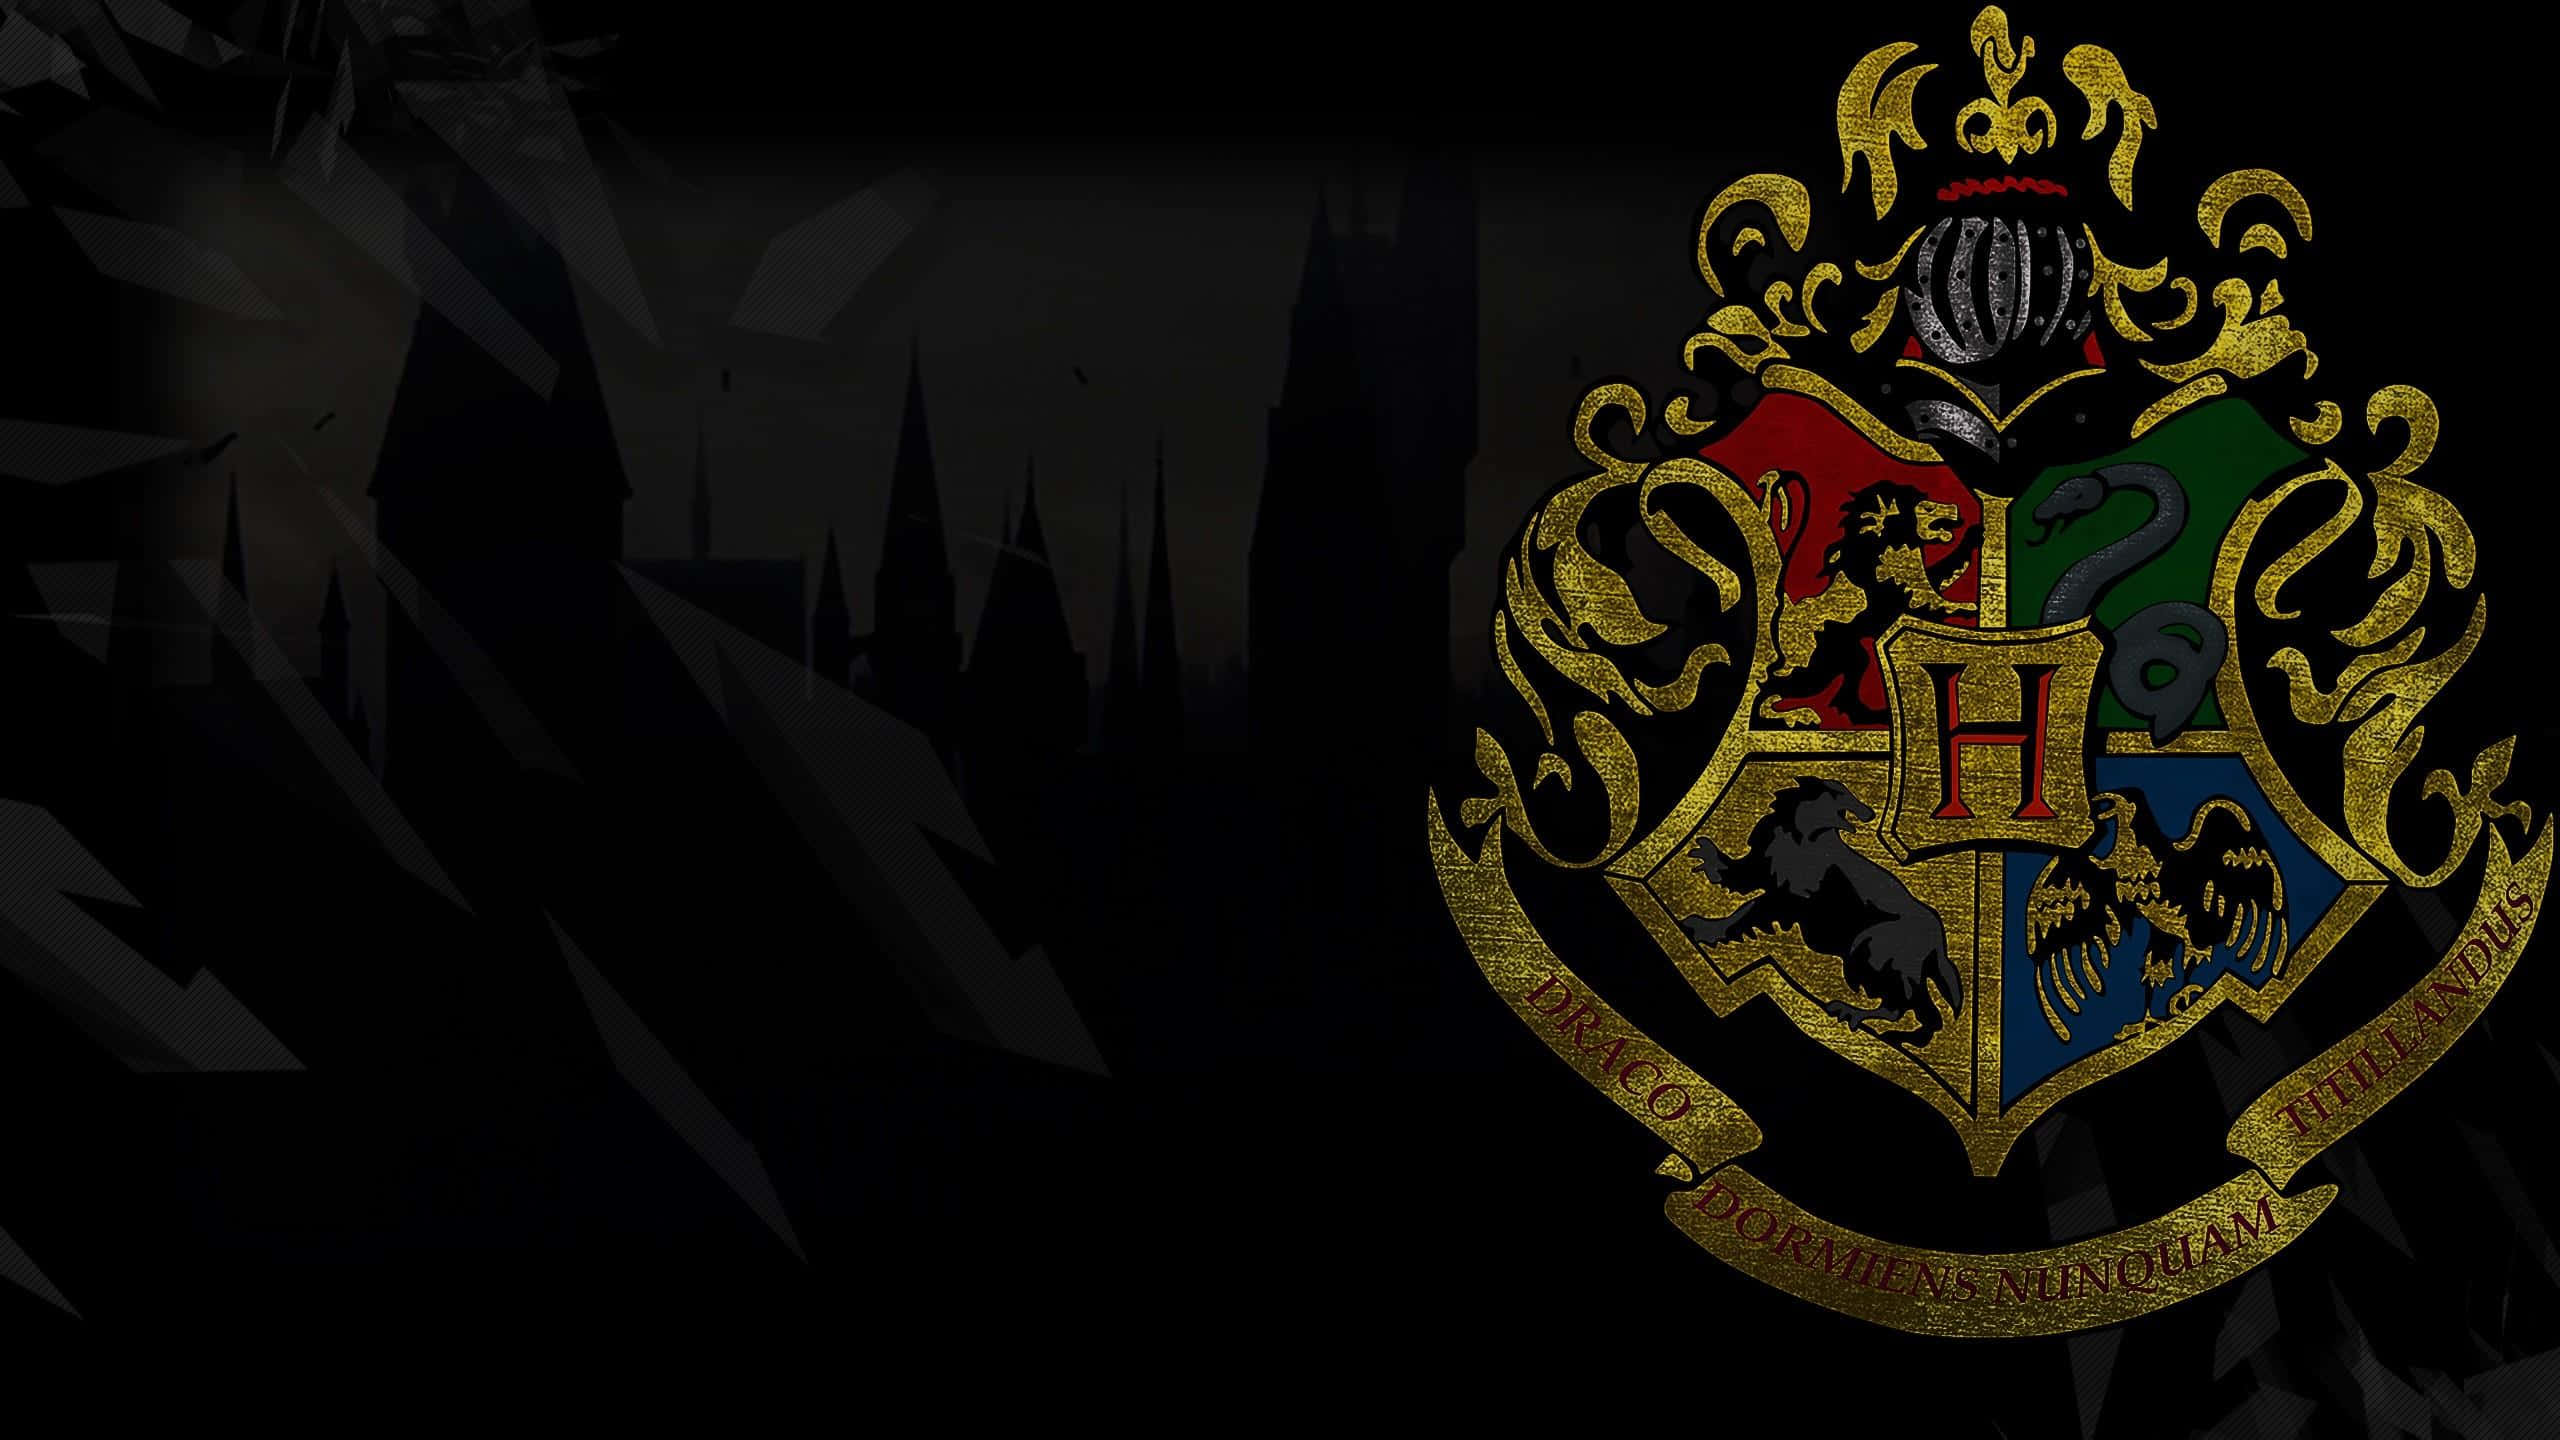 The Prestigious Houses of Hogwarts School of Witchcraft and Wizardry" Wallpaper